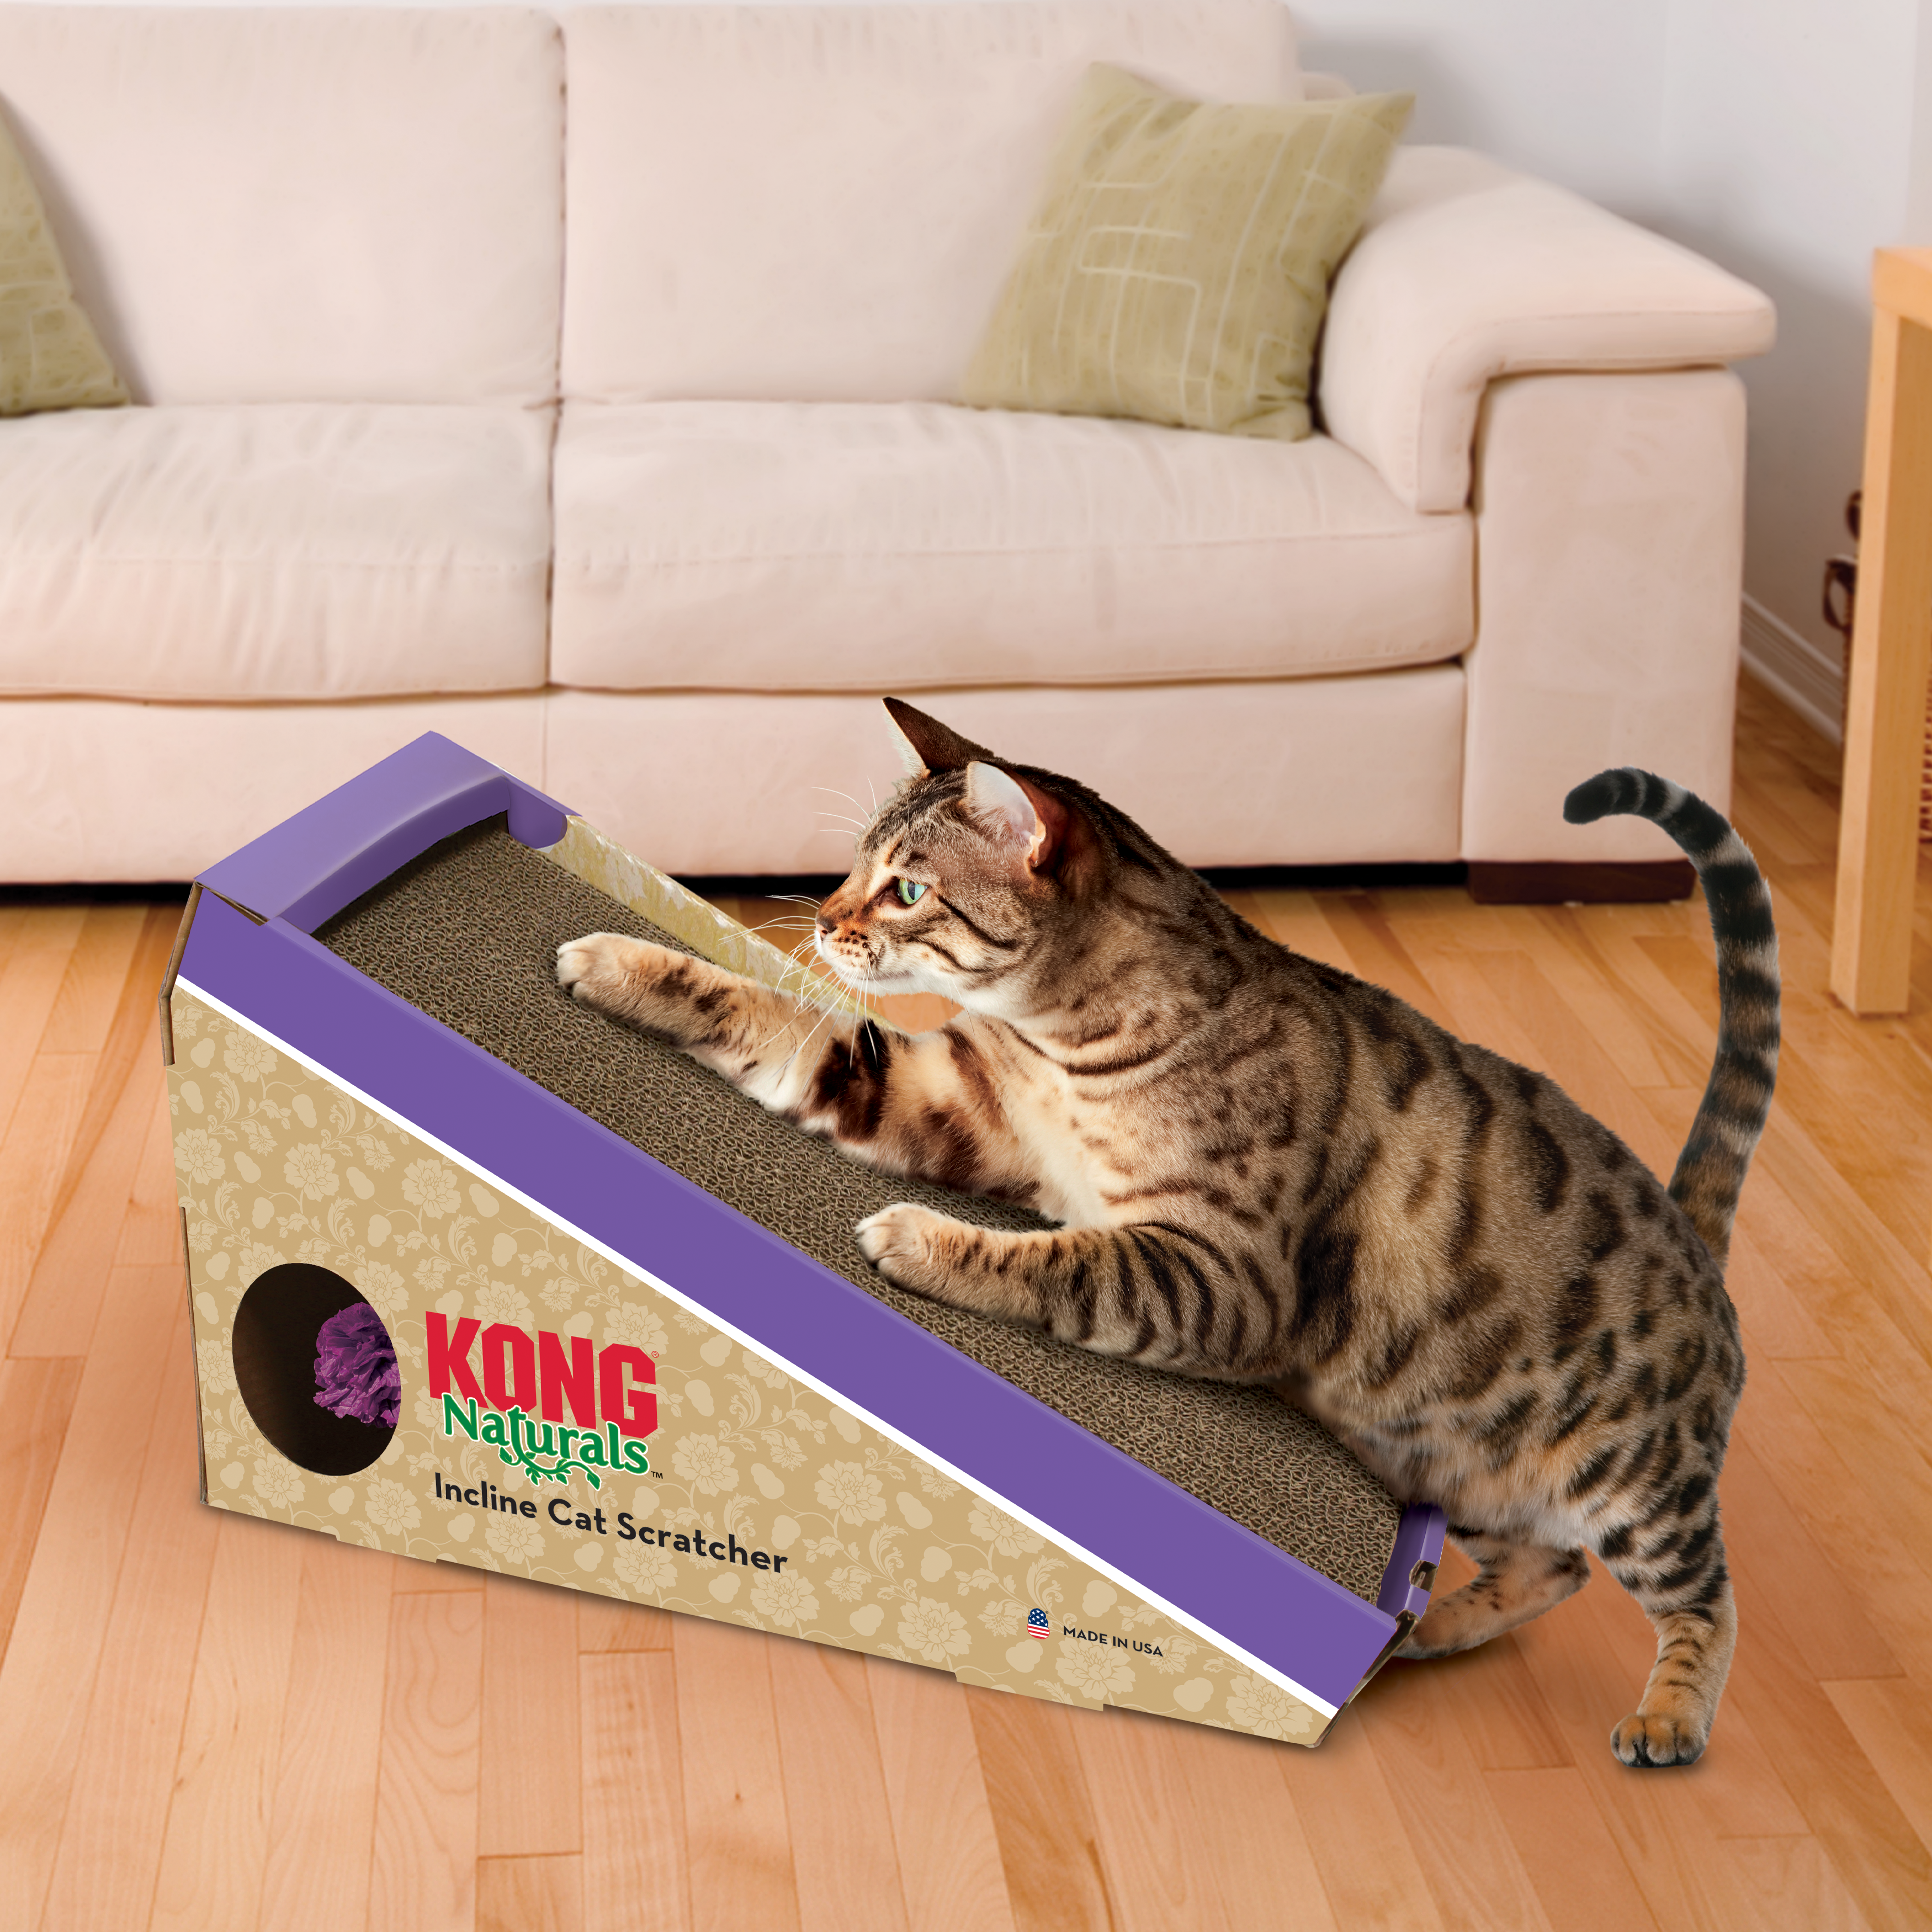 Naturals Scratcher Incline lifestyle product image